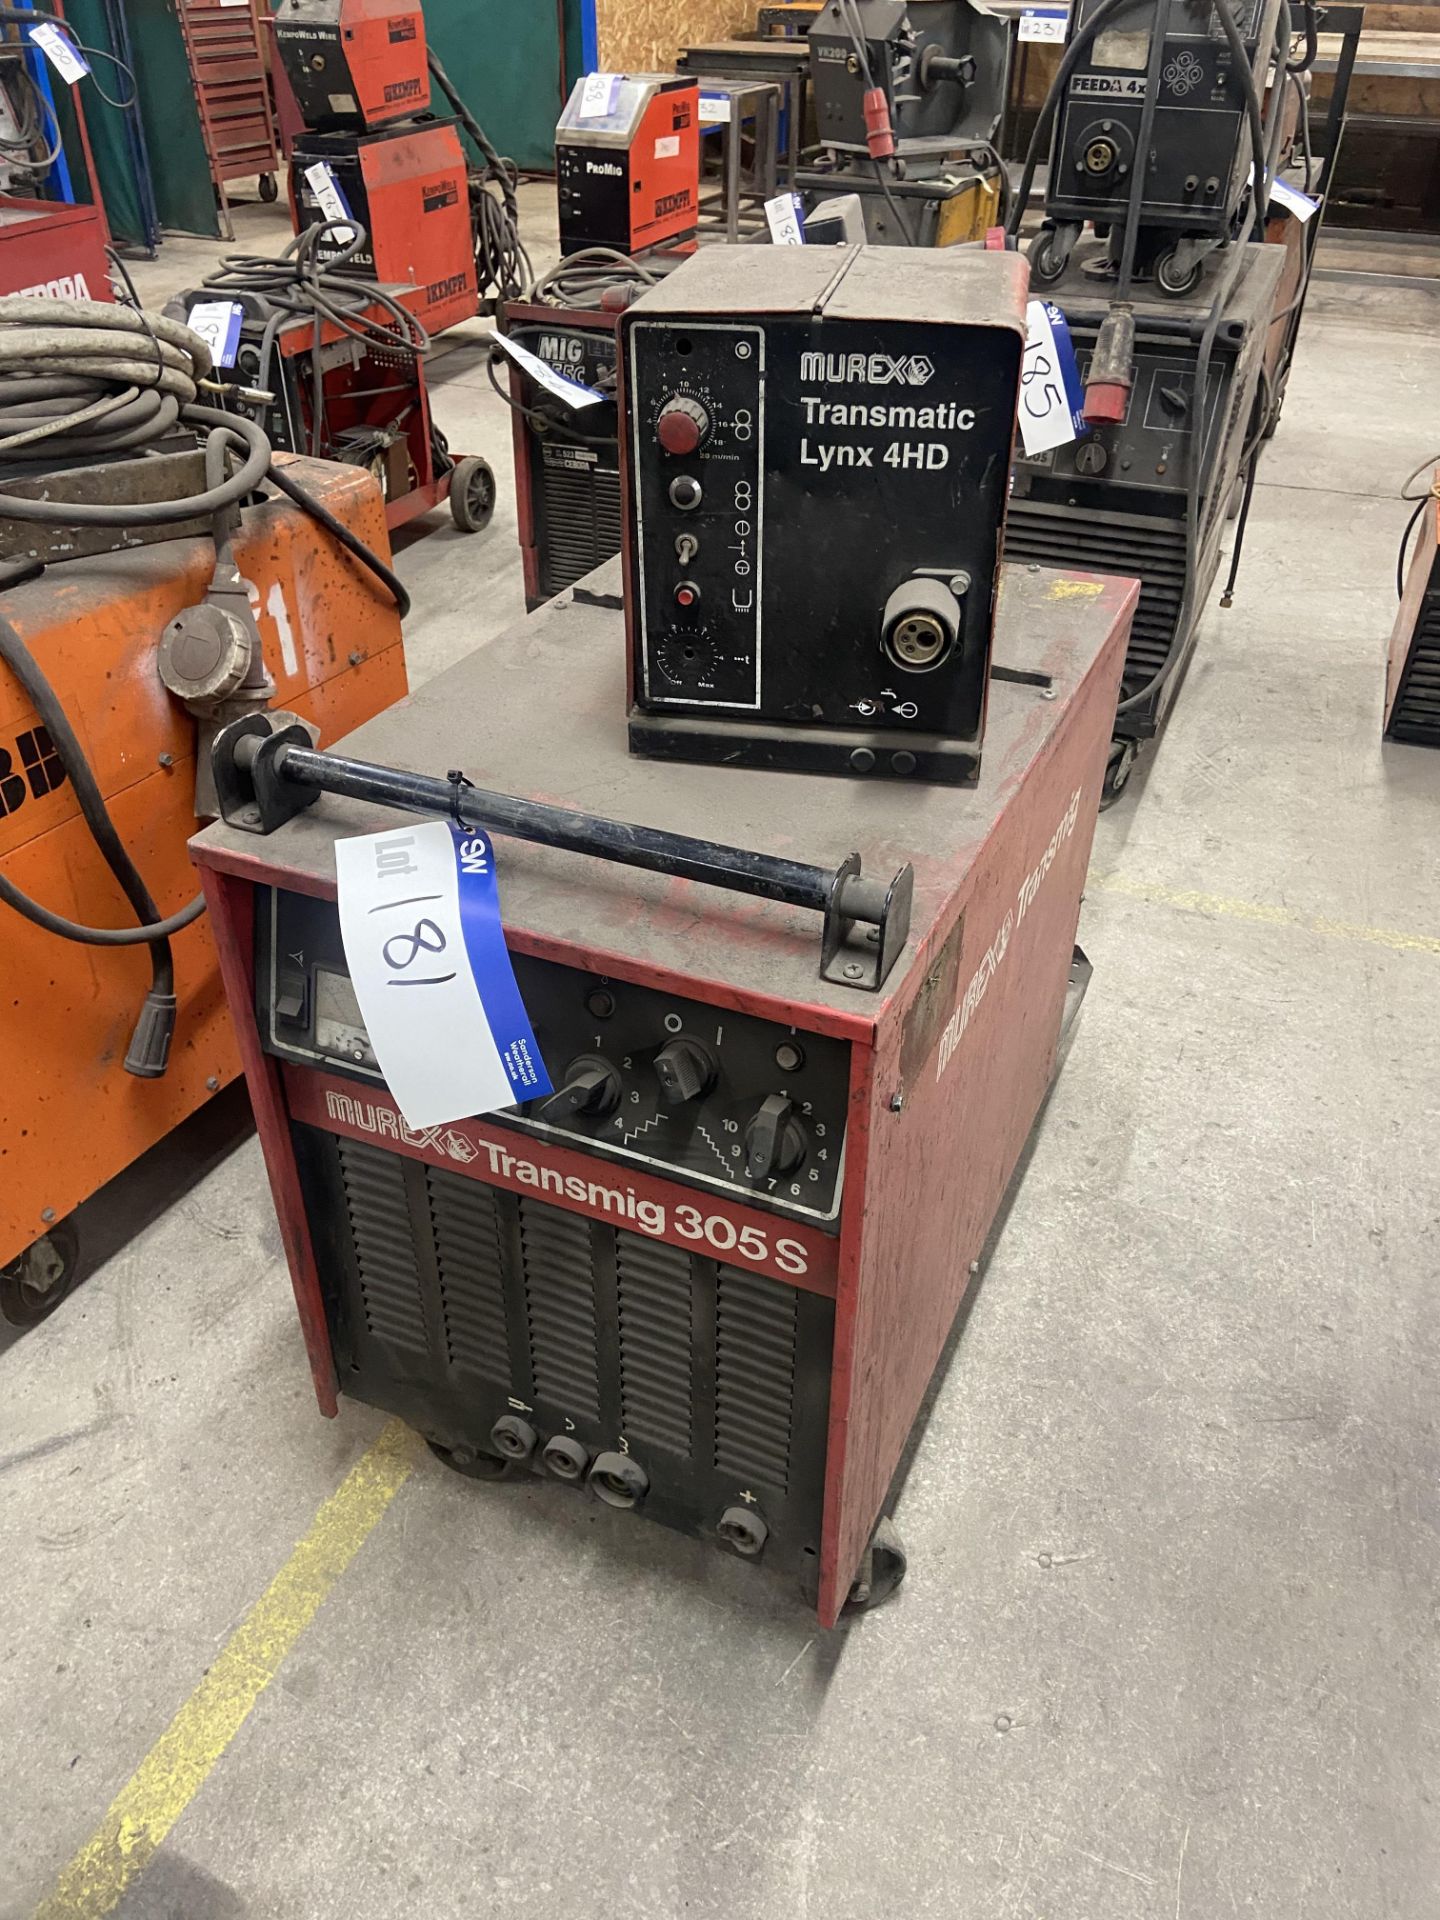 Murex Transmig 305S Welding Equipment (may require attention) Please read the following important